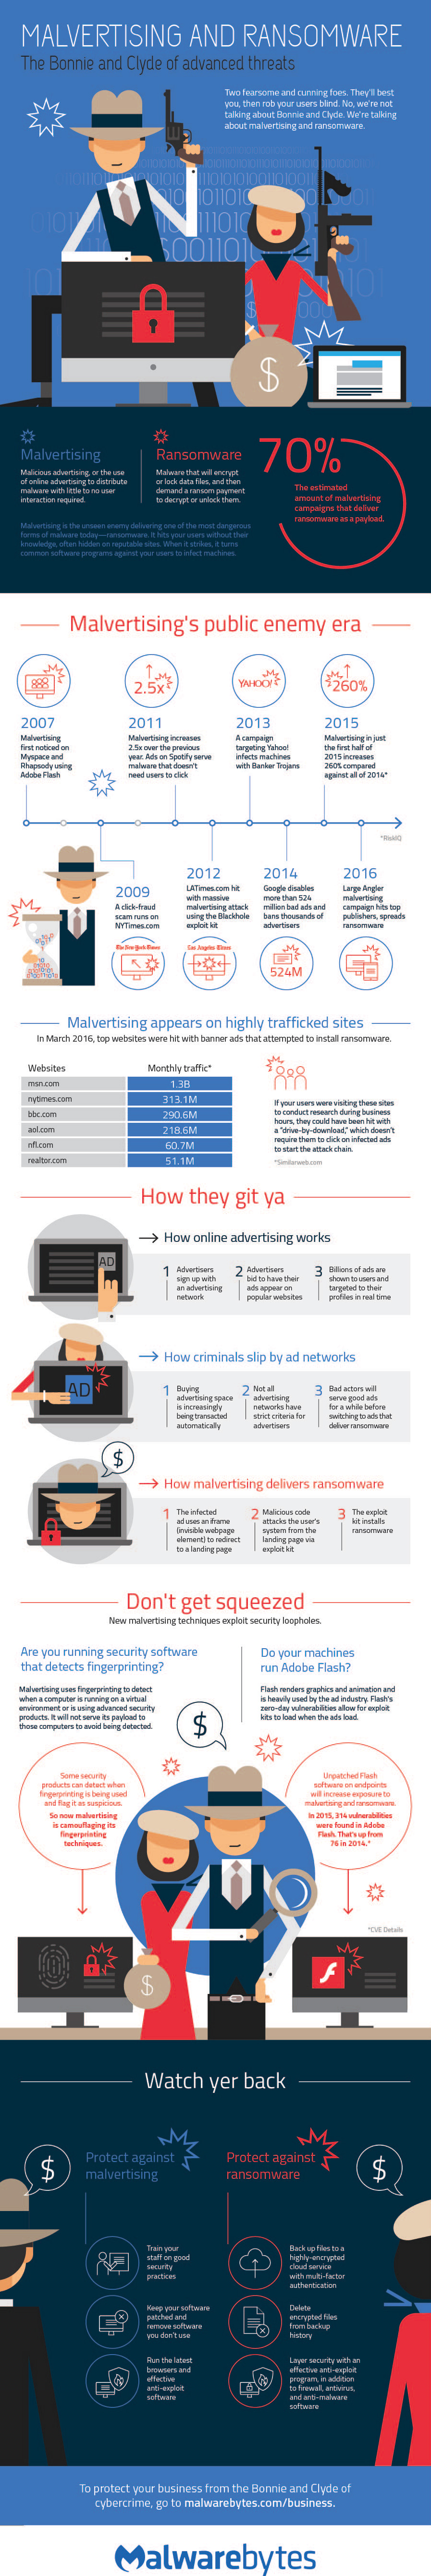 INFOGRAPHIC-Malvertising-and-Ransomware-final-1